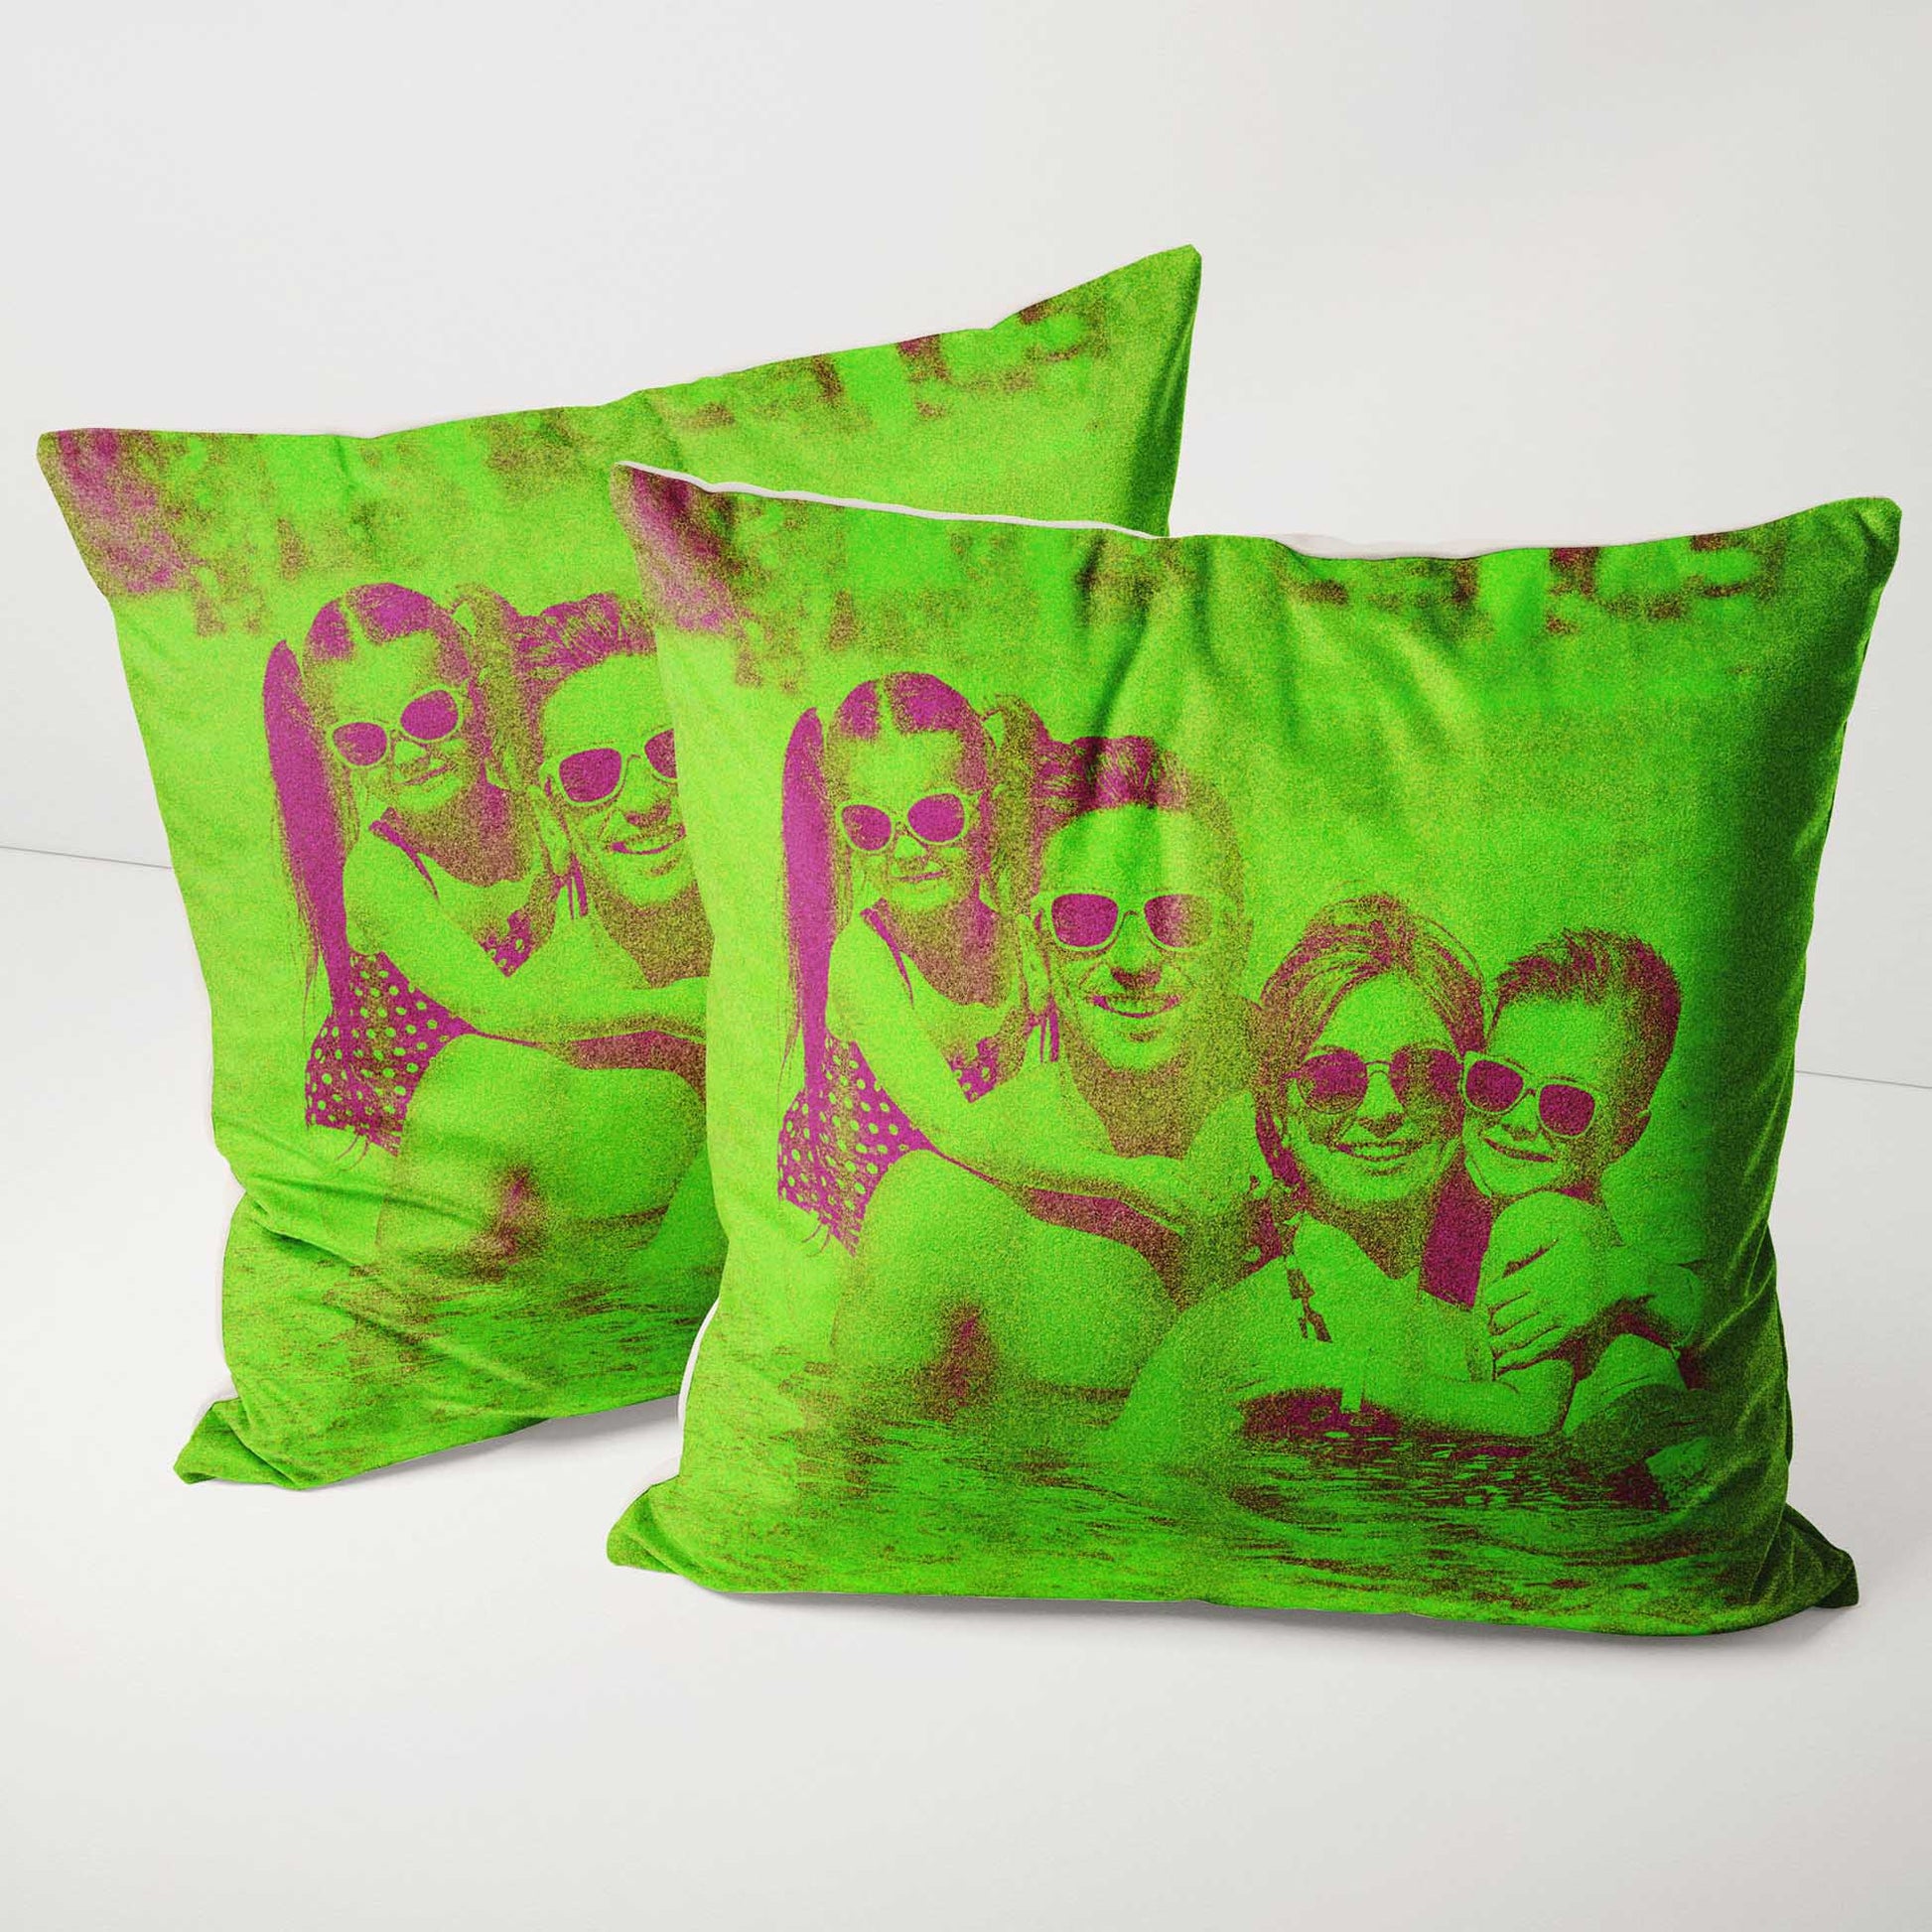 Elevate your home decor with the Personalised Neon Green Cushion. Its fresh and fun design sets a vibrant and cool ambiance, perfect for parties and gatherings. Made from soft velvet and lovingly handmade